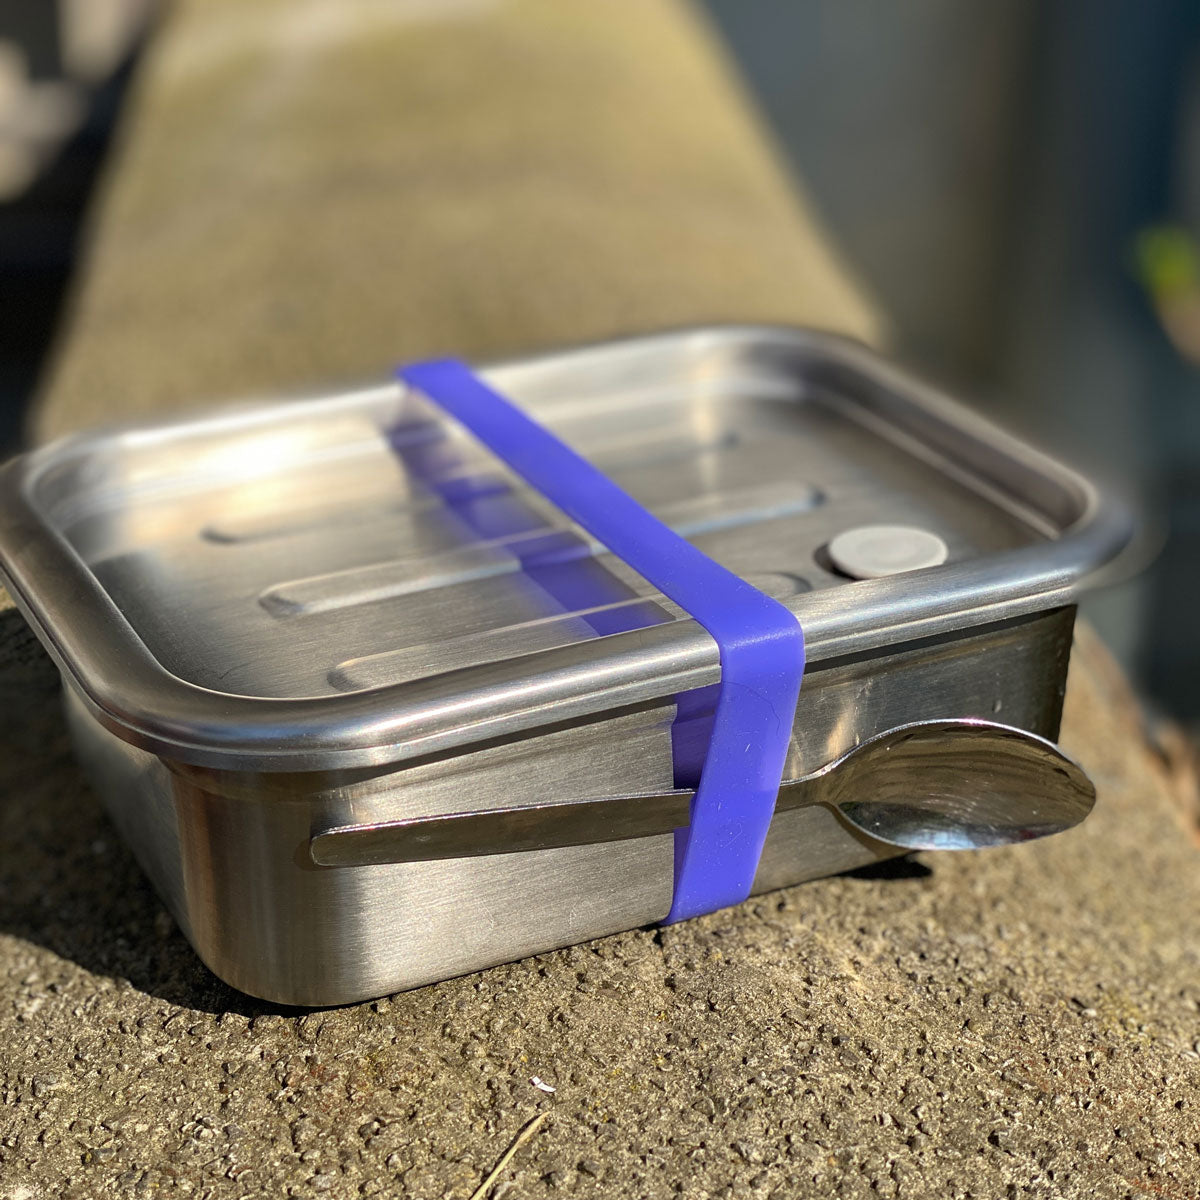 stainless steel snack box closed with purple rubber band to hold the spoon